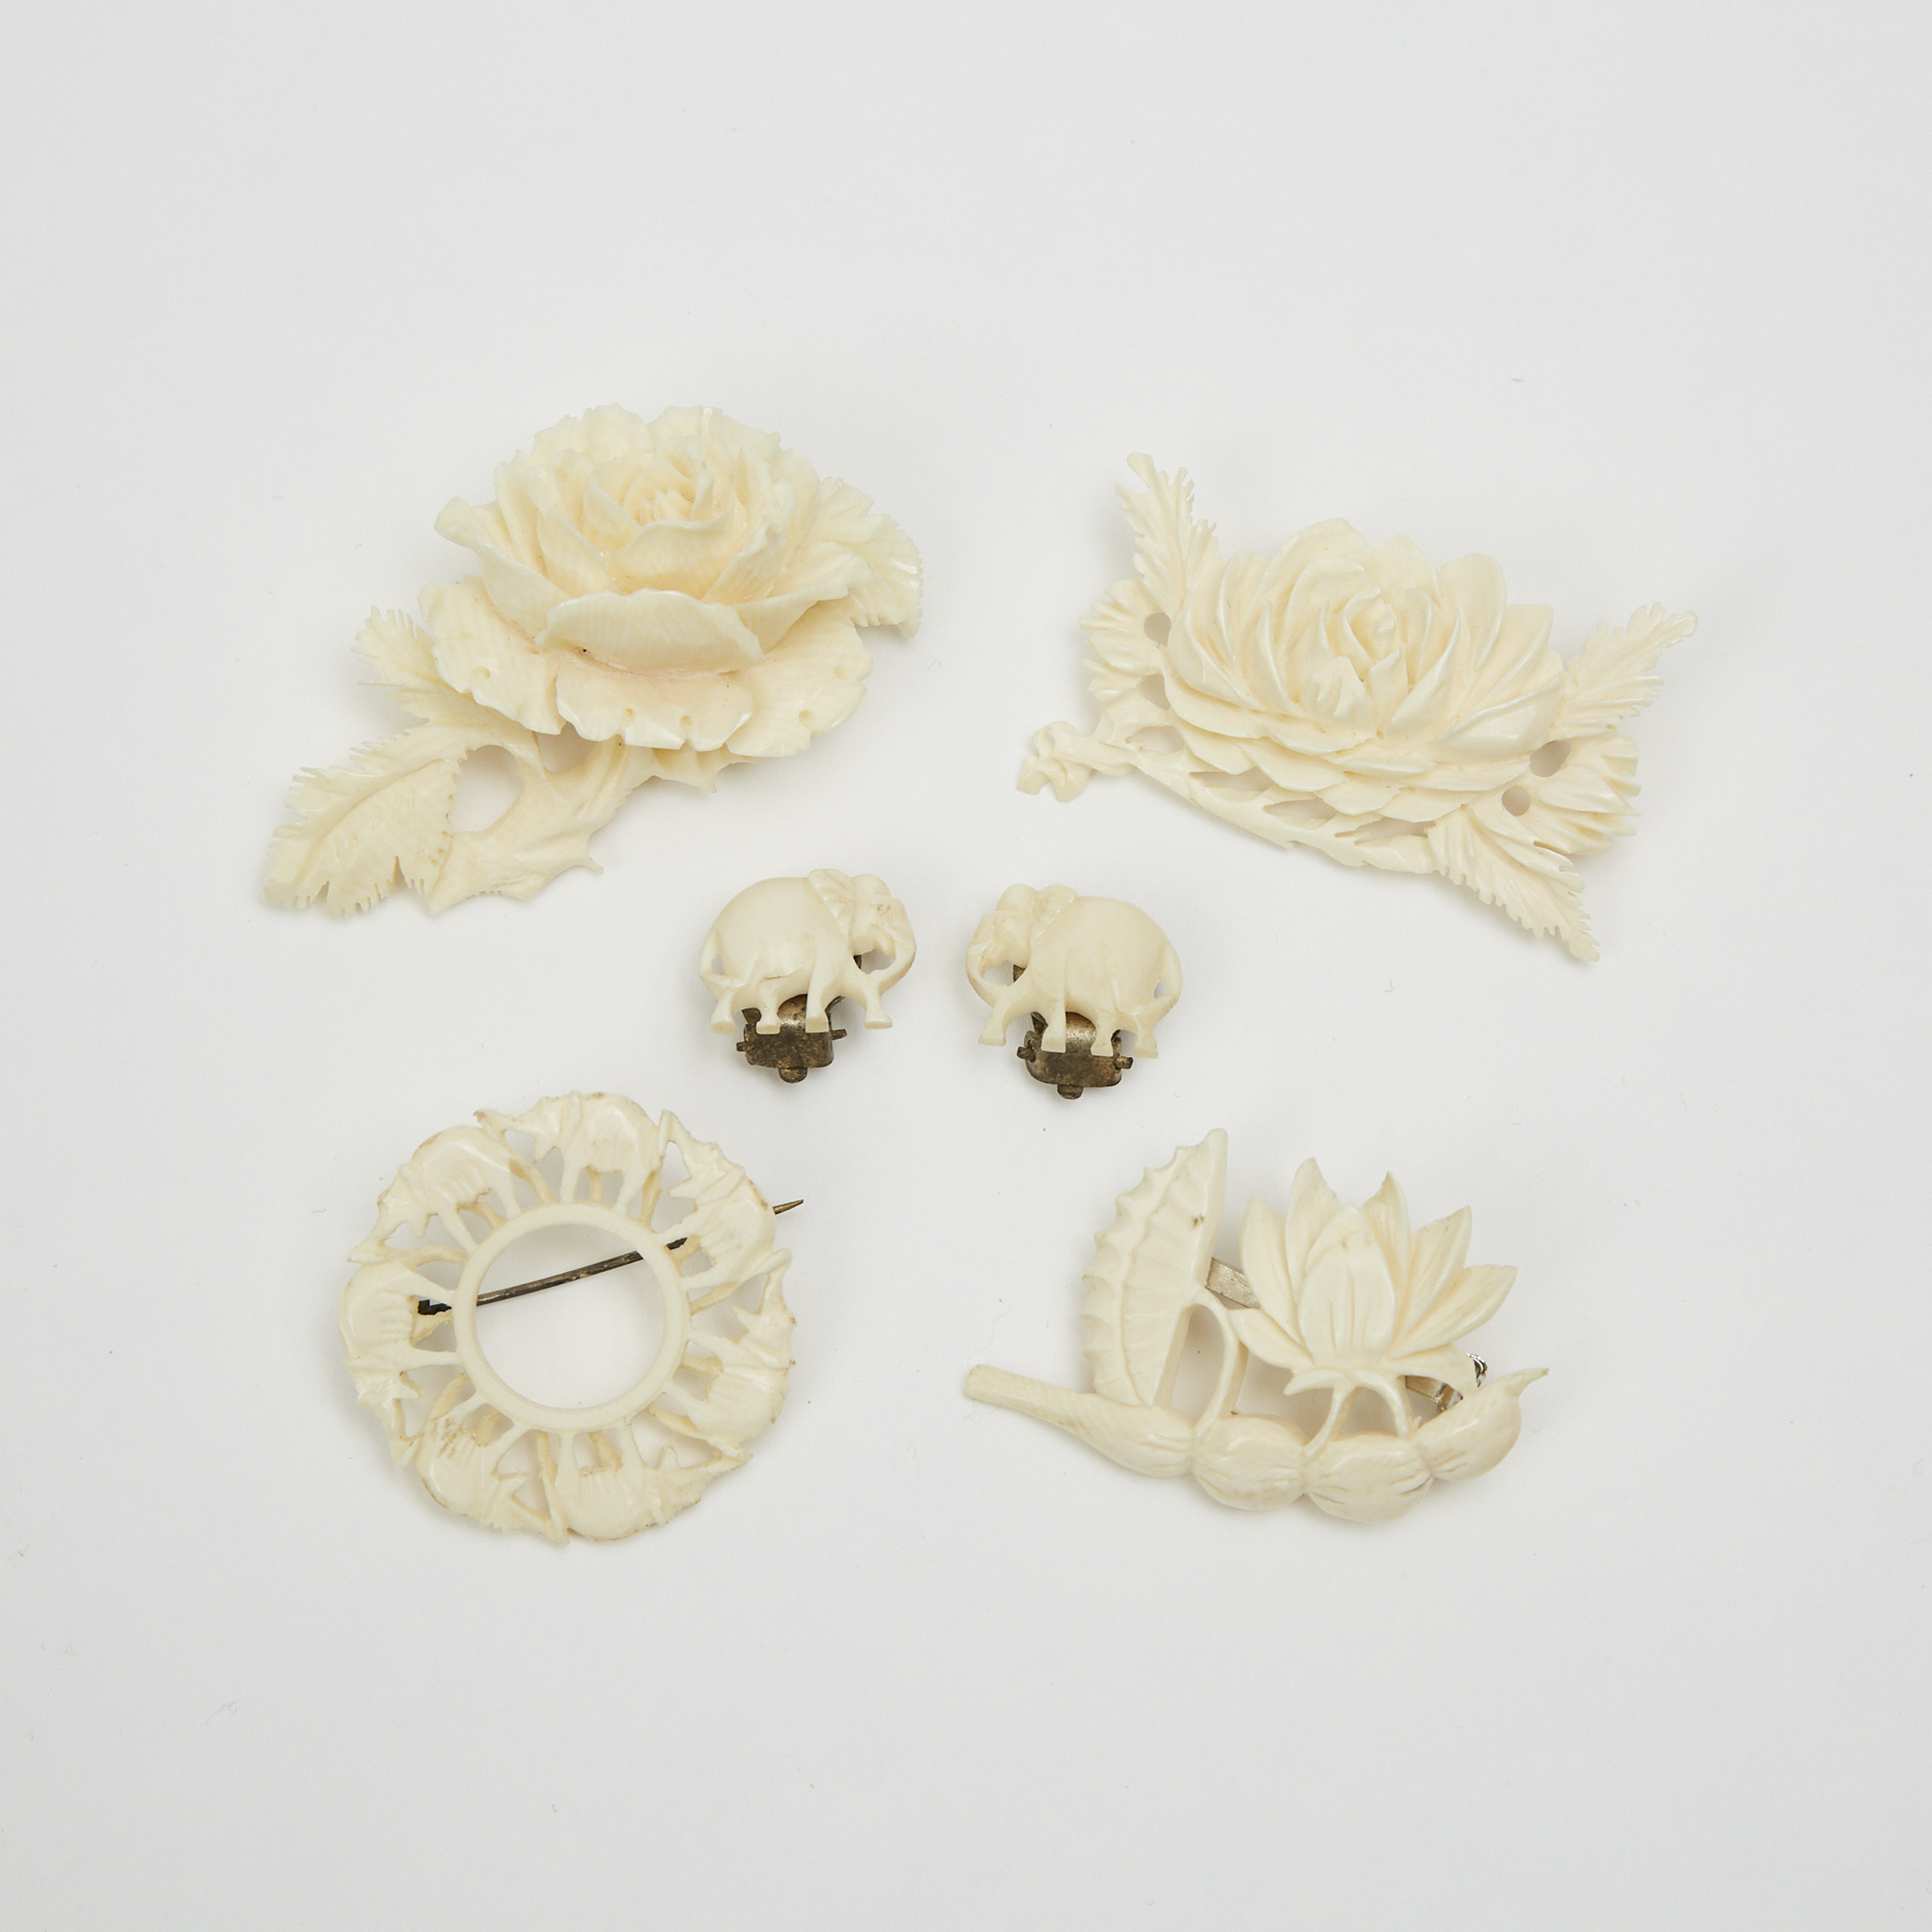 A Group of Four Ivory Brooches and a Pair of Clip-Back Earrings